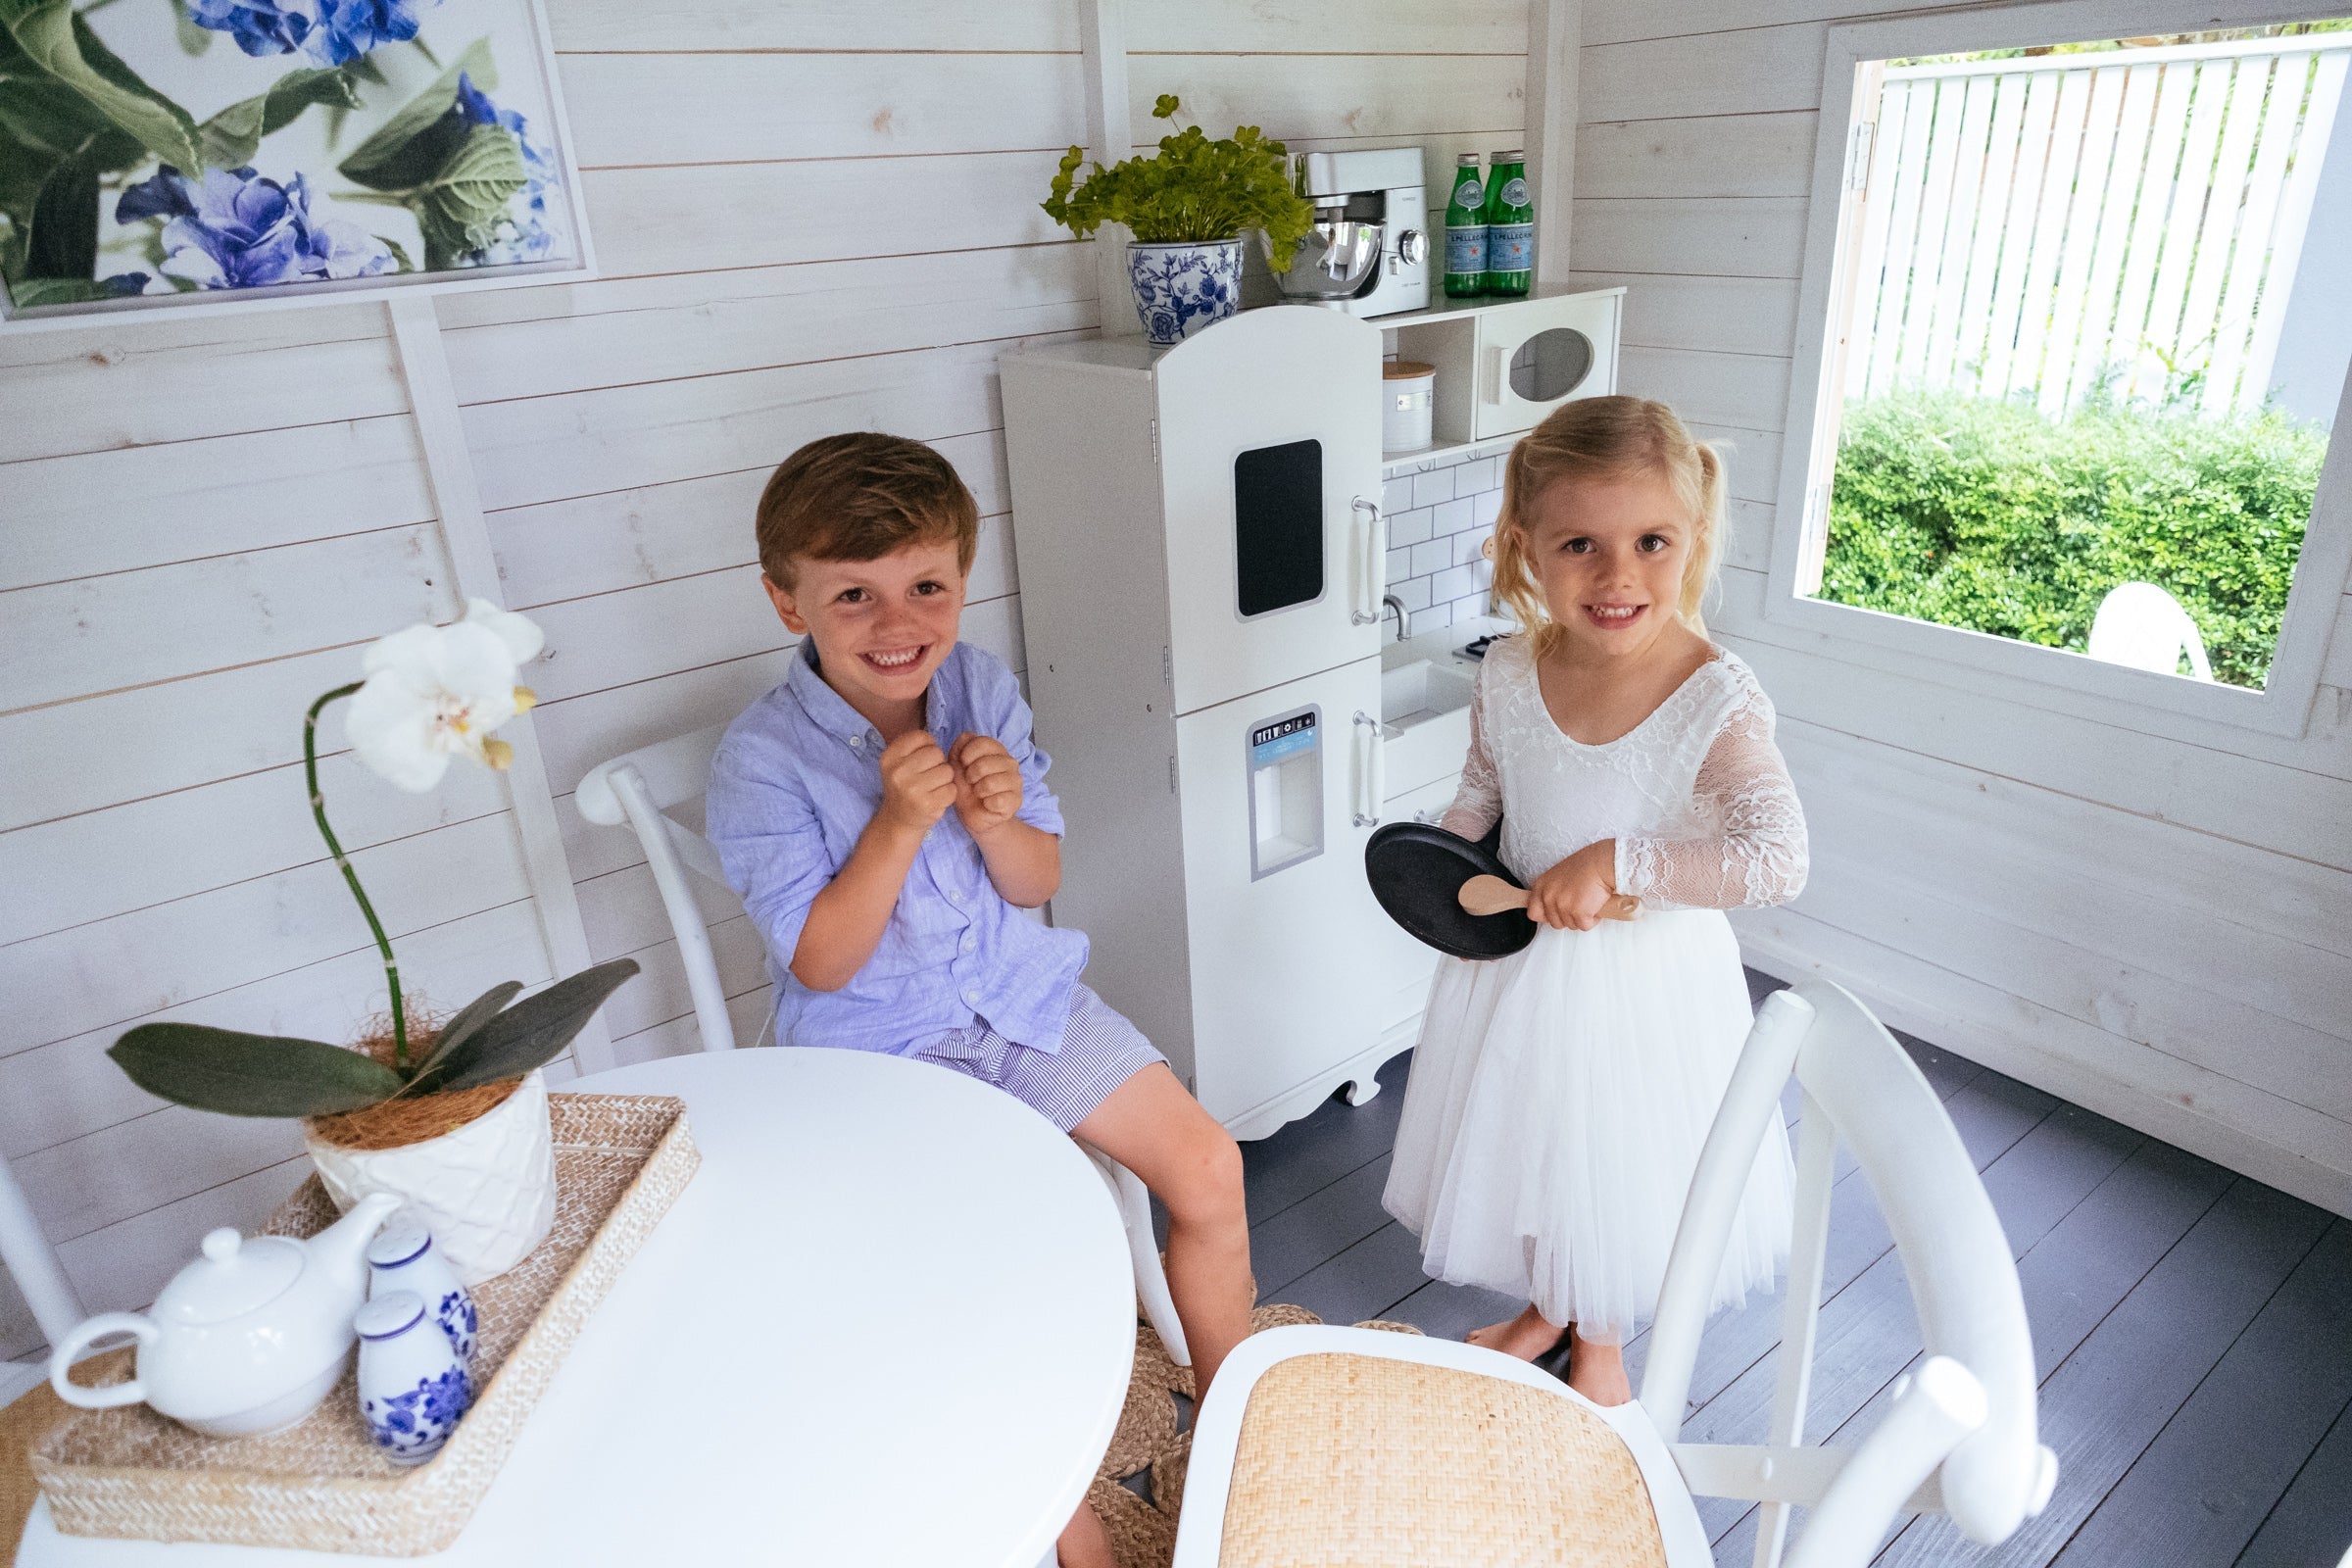 Young boy and girl play inside white and grey cubby house